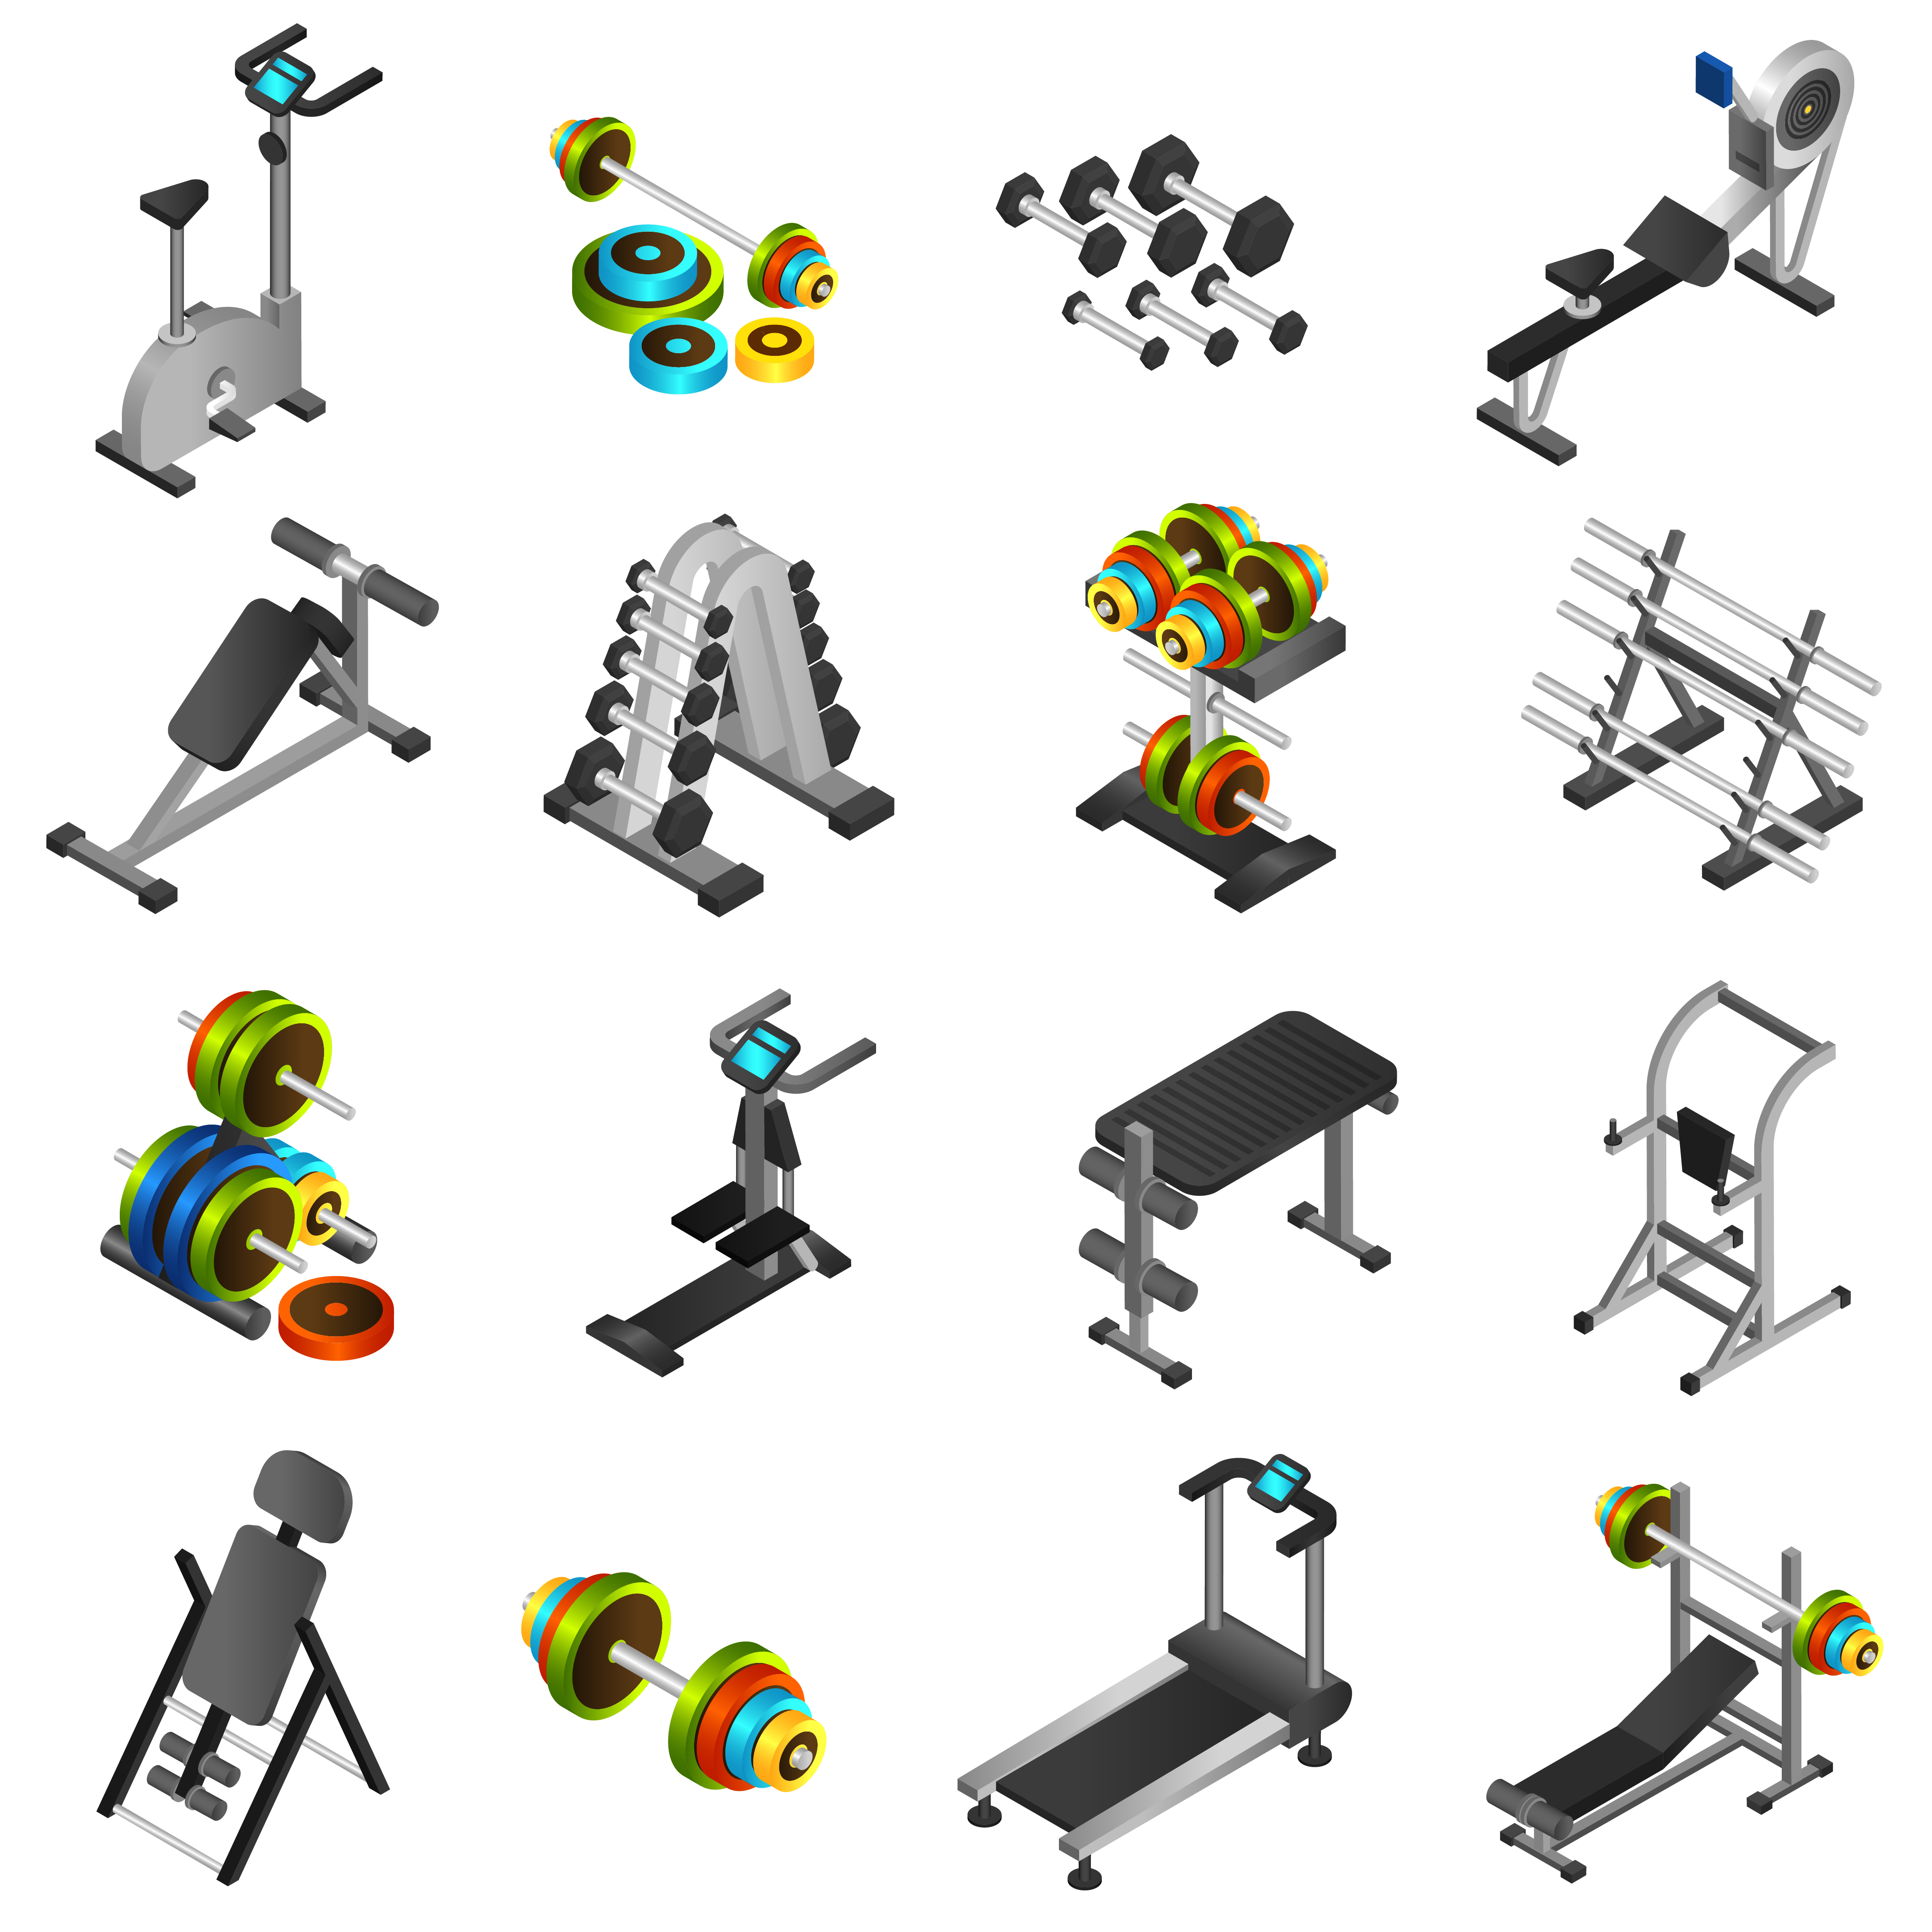 5 Day Workout equipment clipart for Women